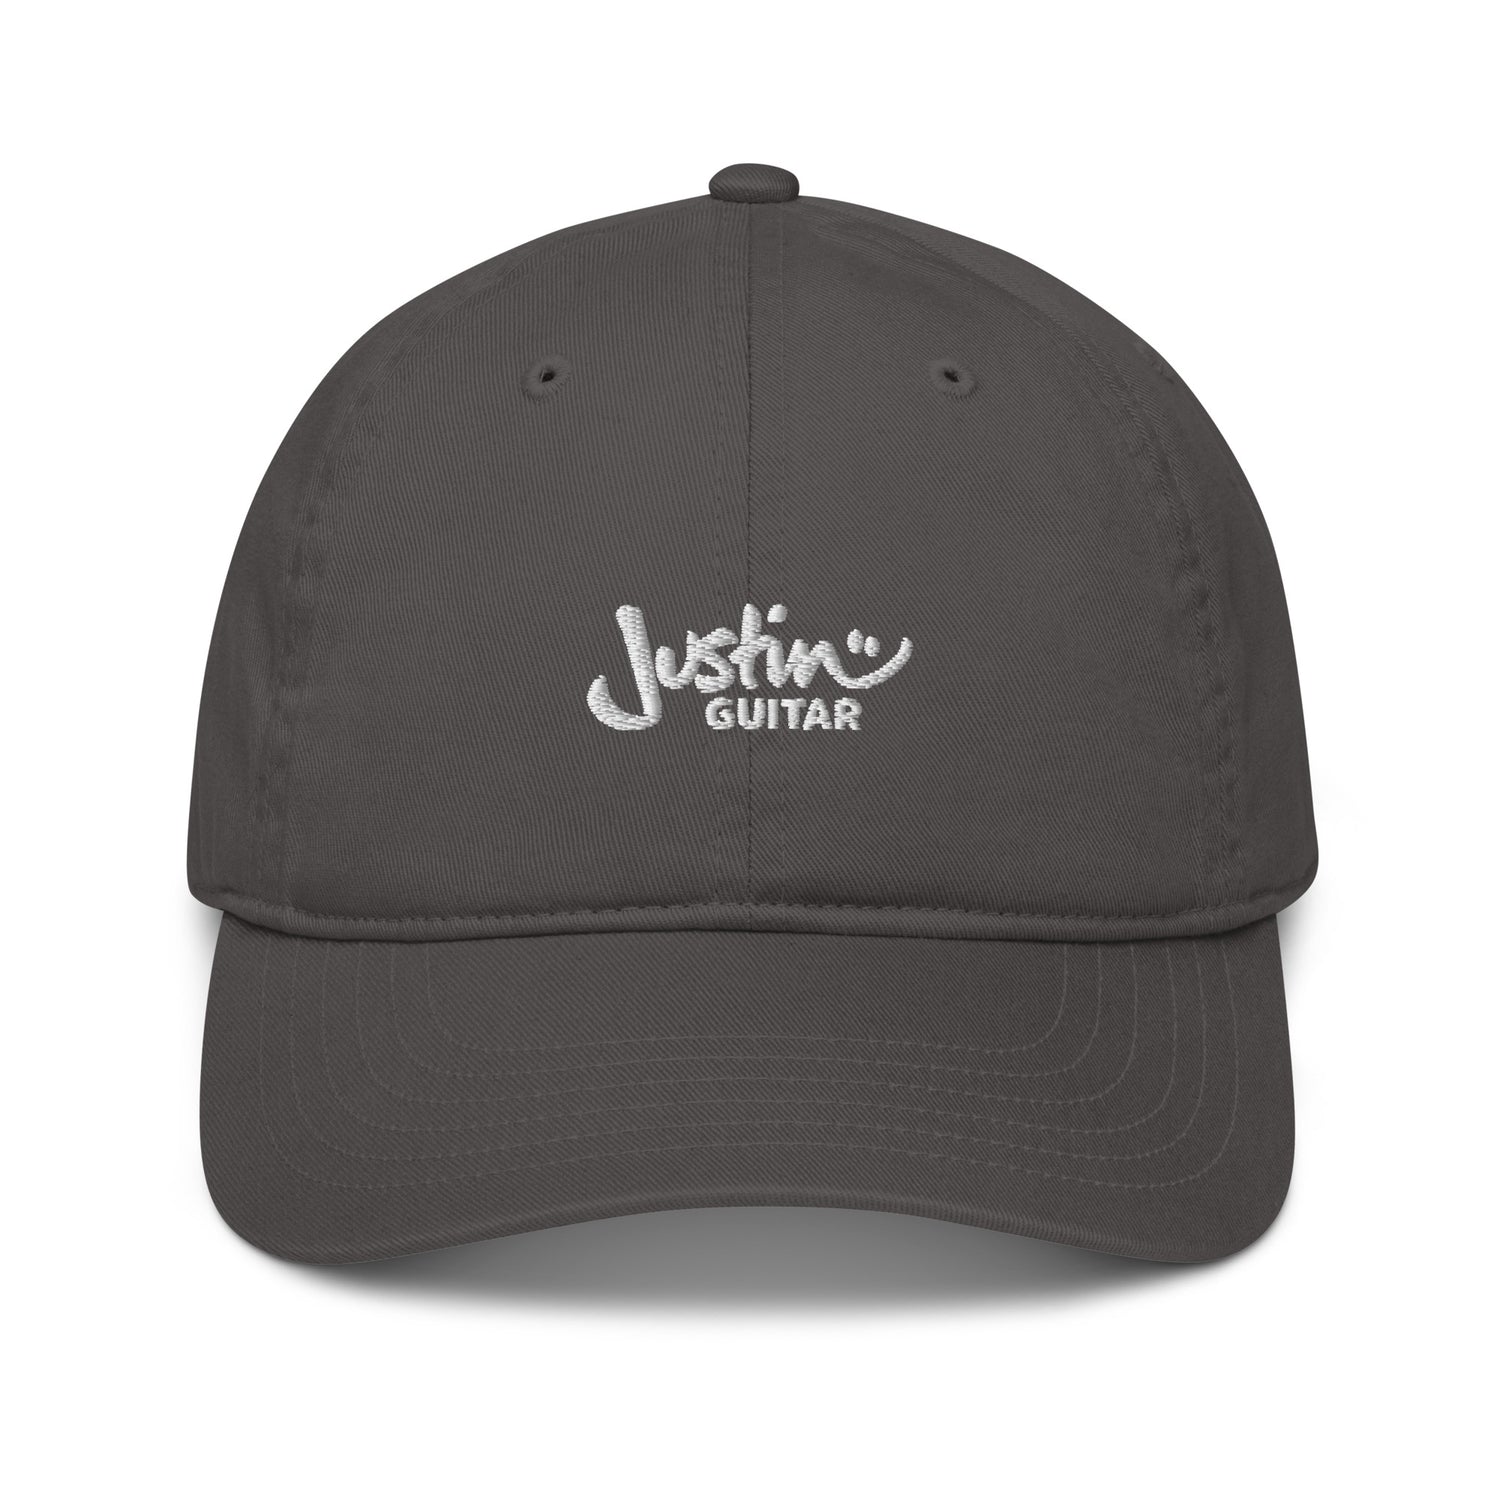 Grey baseball cap with JustinGuitar logo embroidered in the front. 